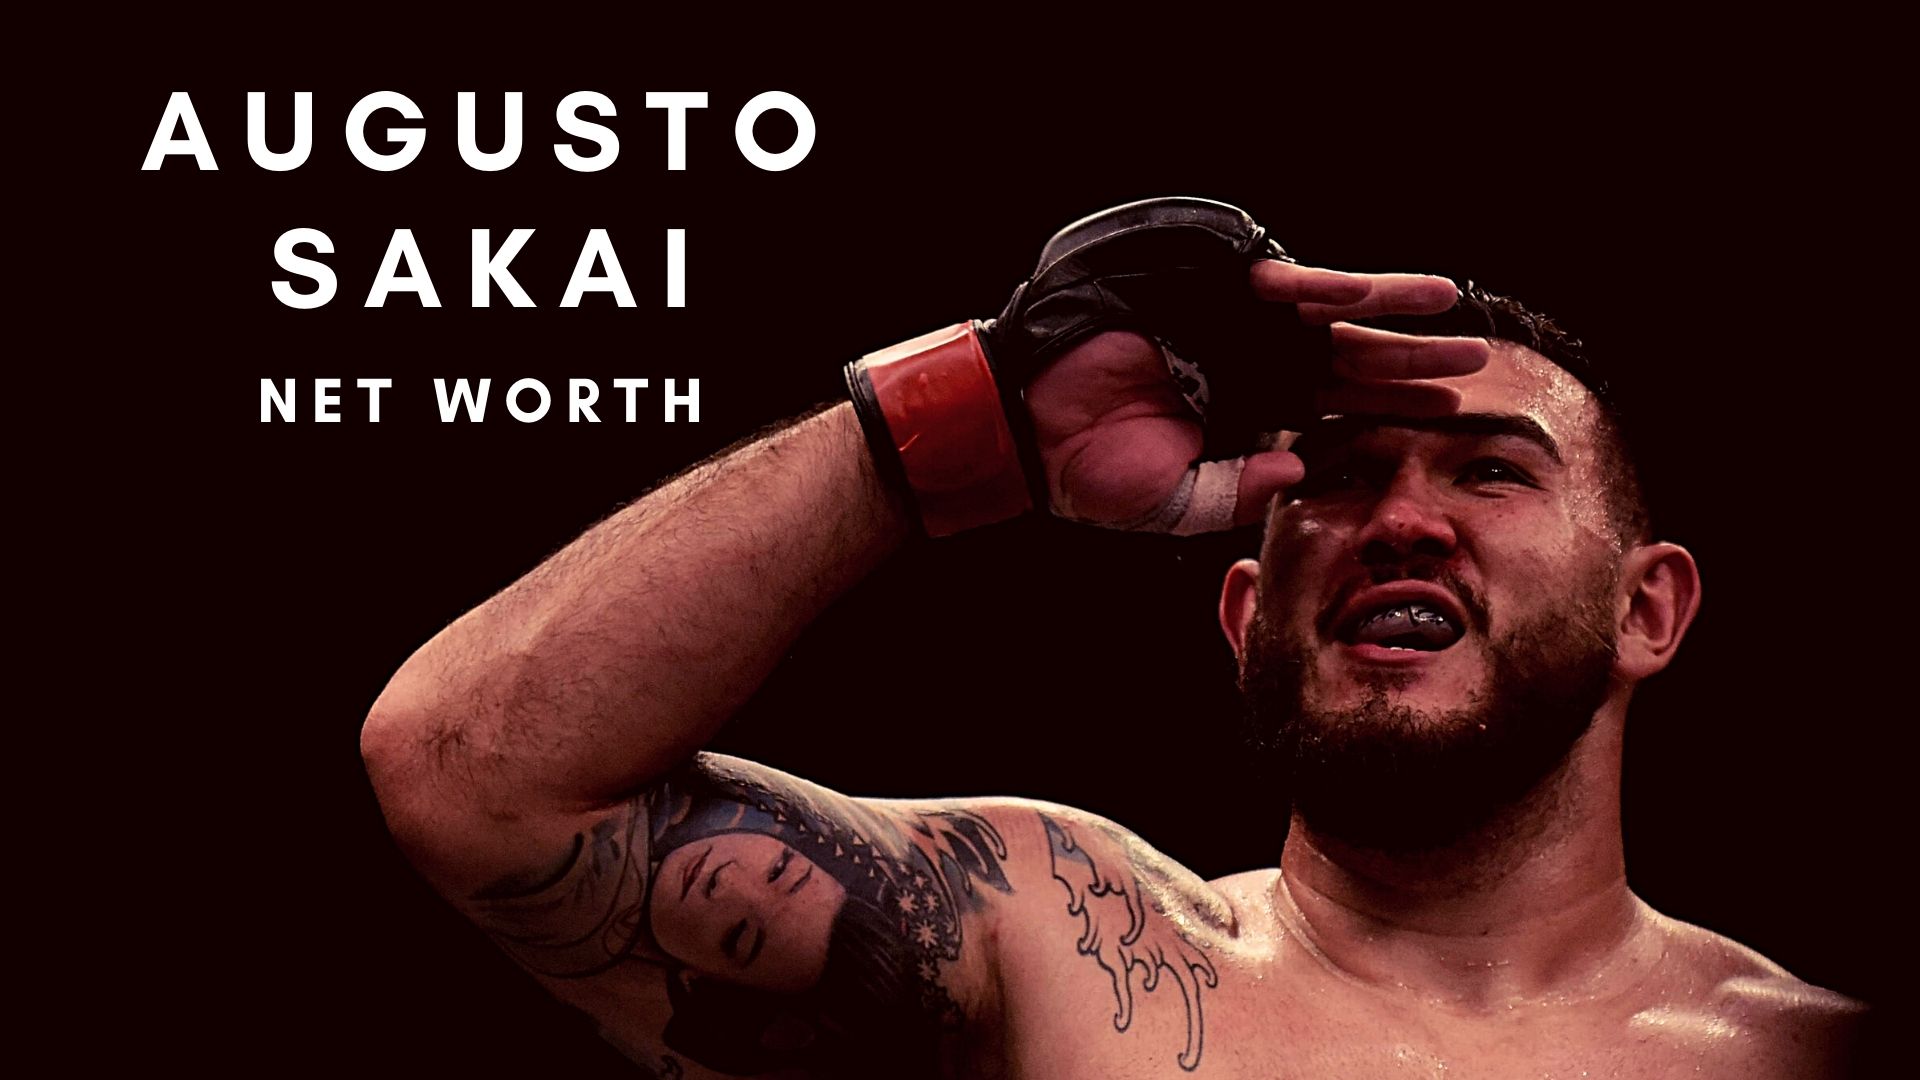 Augusto Sakai has a decent net worth thanks to his MMA career